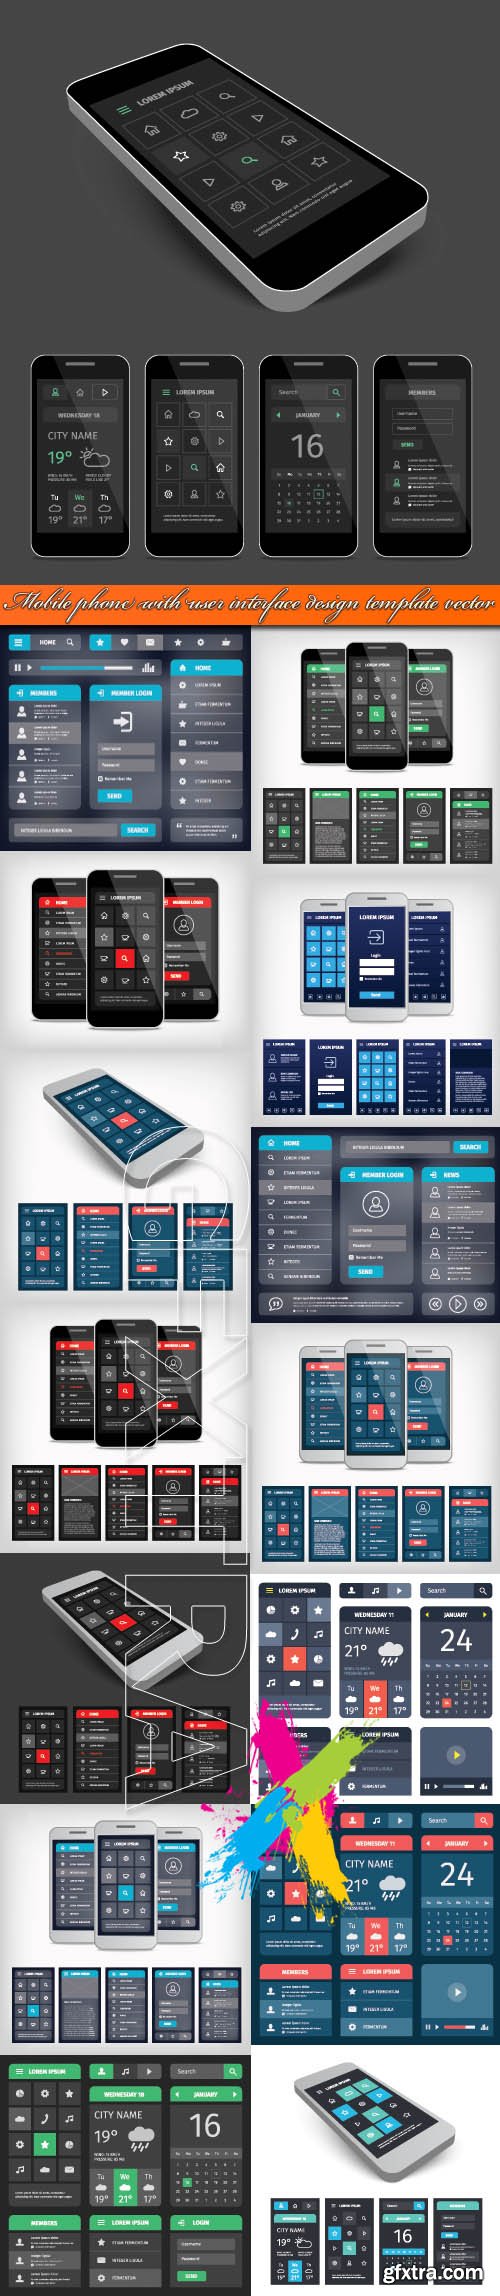 Mobile phone with user interface design template vector